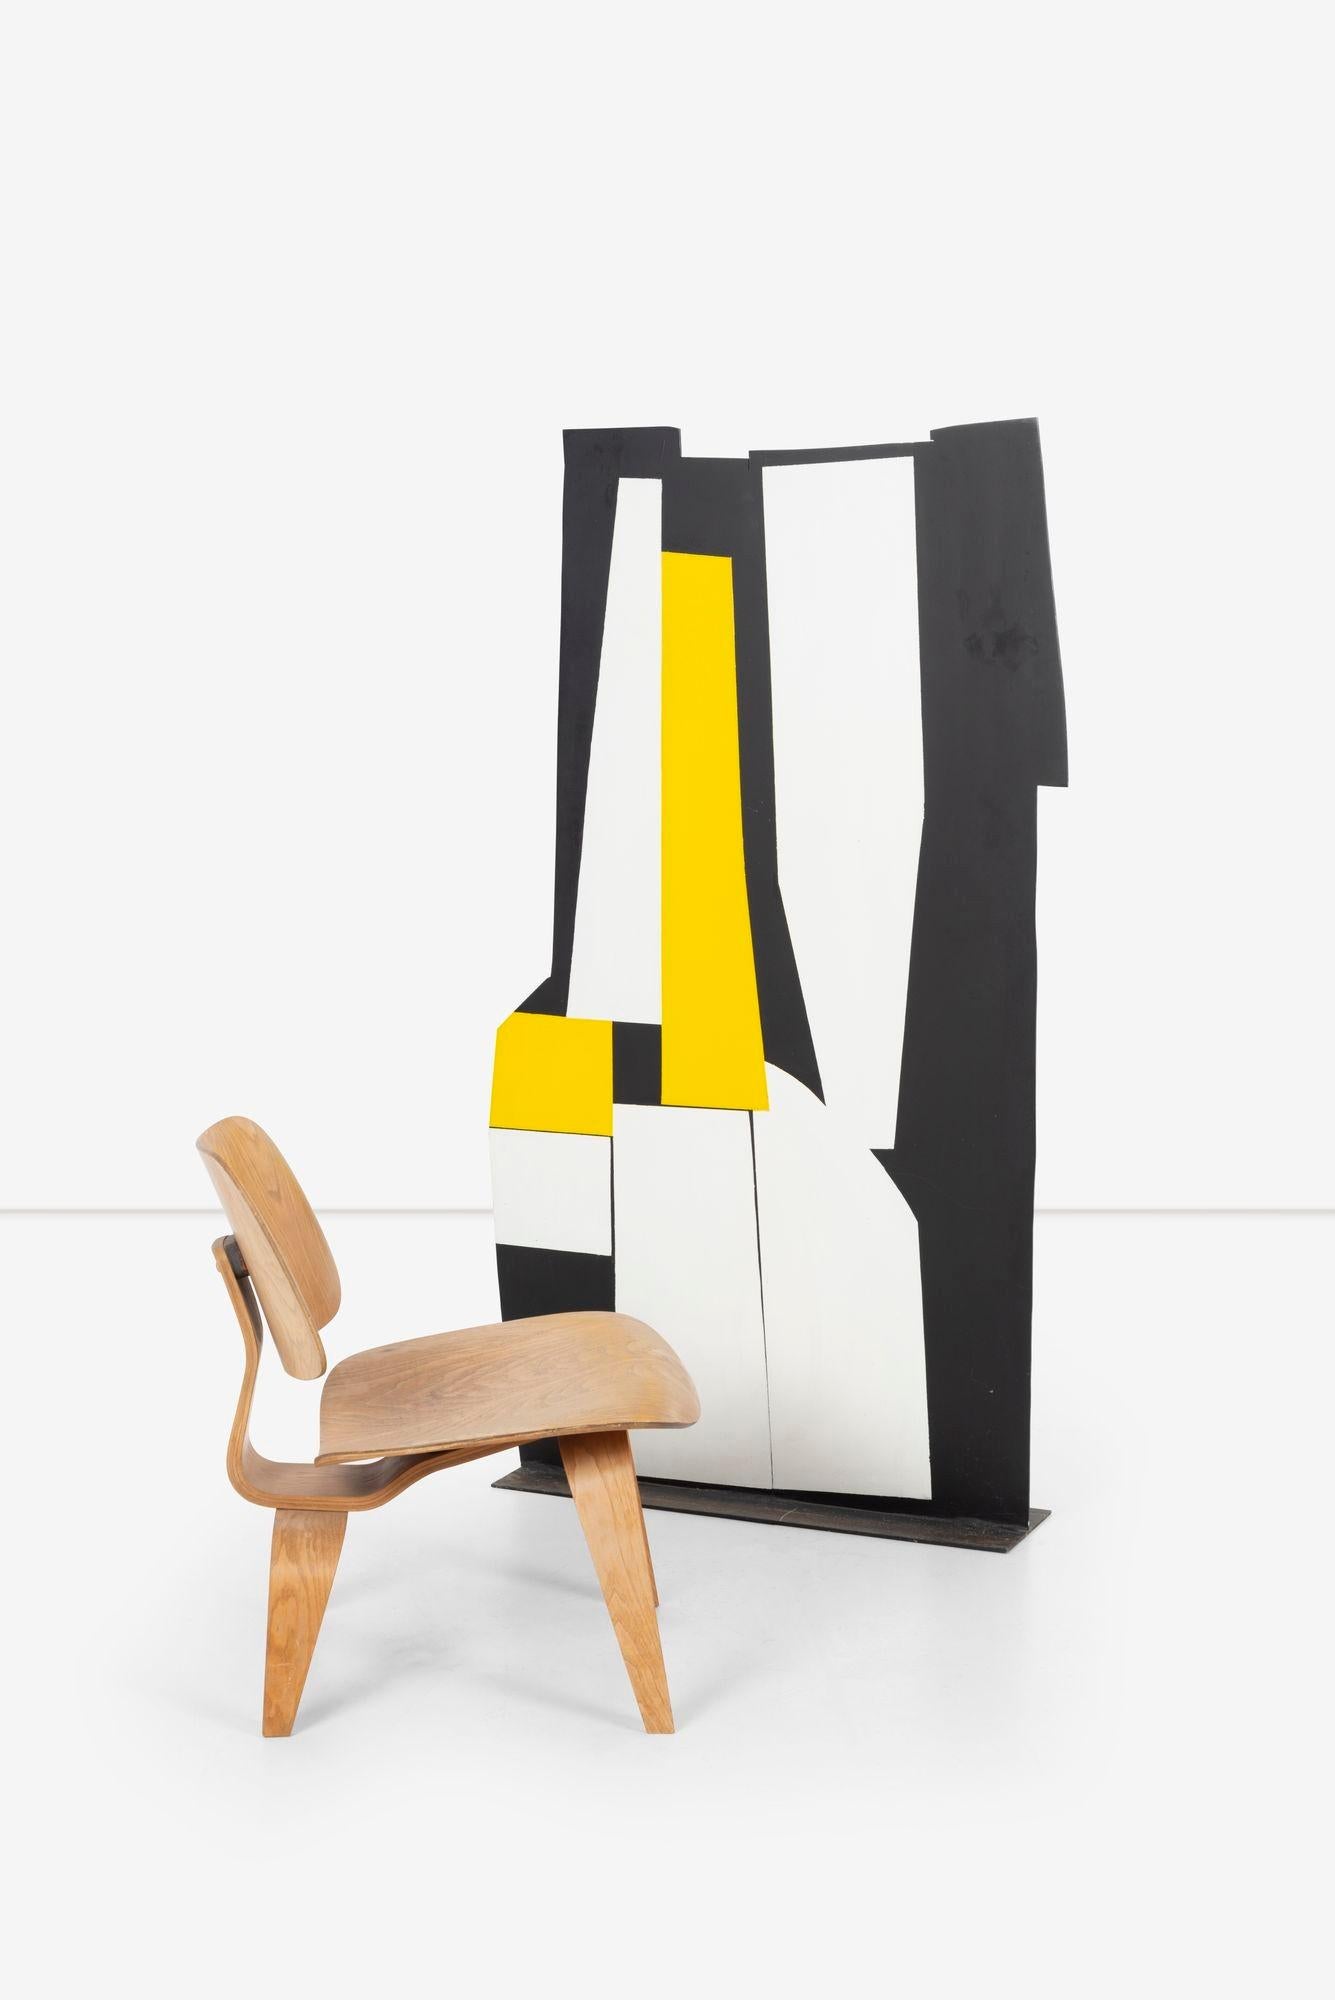 Late 20th Century Tony Rosenthal Standing Black and White Plus Yellow Floor Sculpture For Sale